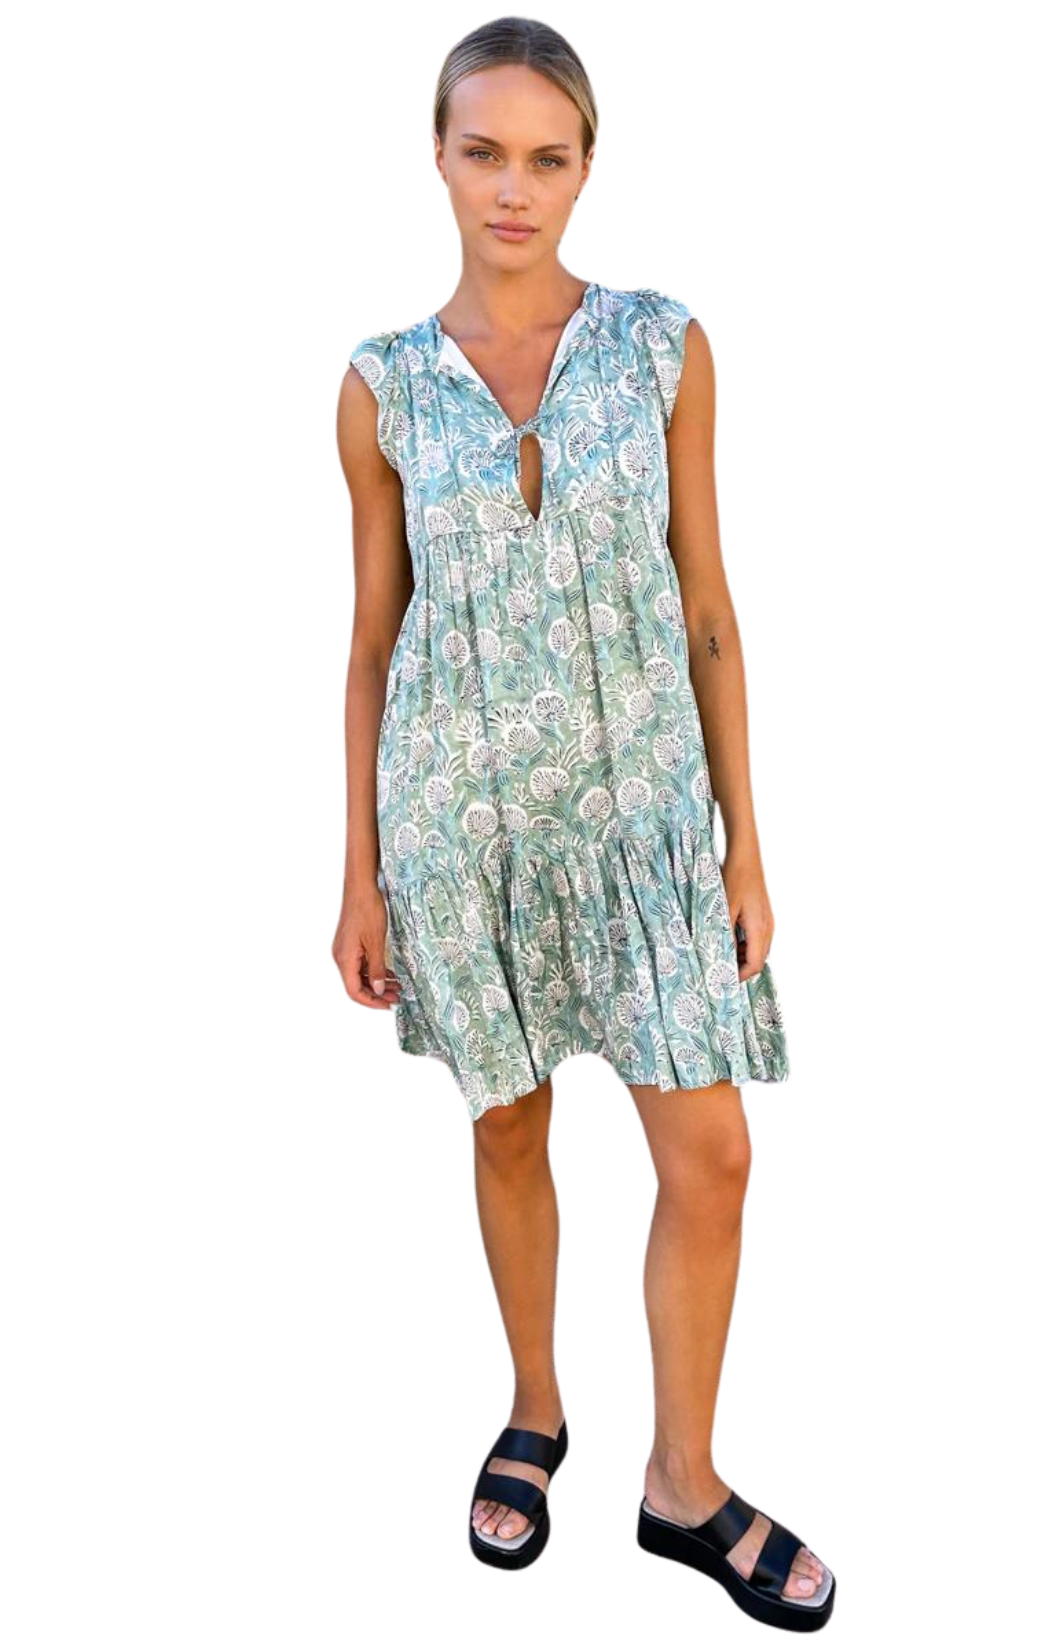 The Angel Dress is crafted using organic and hand block printed in Rajasthan. With a low impact dye, this easy/breezy fit dress is not only elegant but also environmentally-friendly. The lined design, along with tie closures, make it perfect for any occasion. Hand wash cold, gentle + air dry. By Emerson Fry.